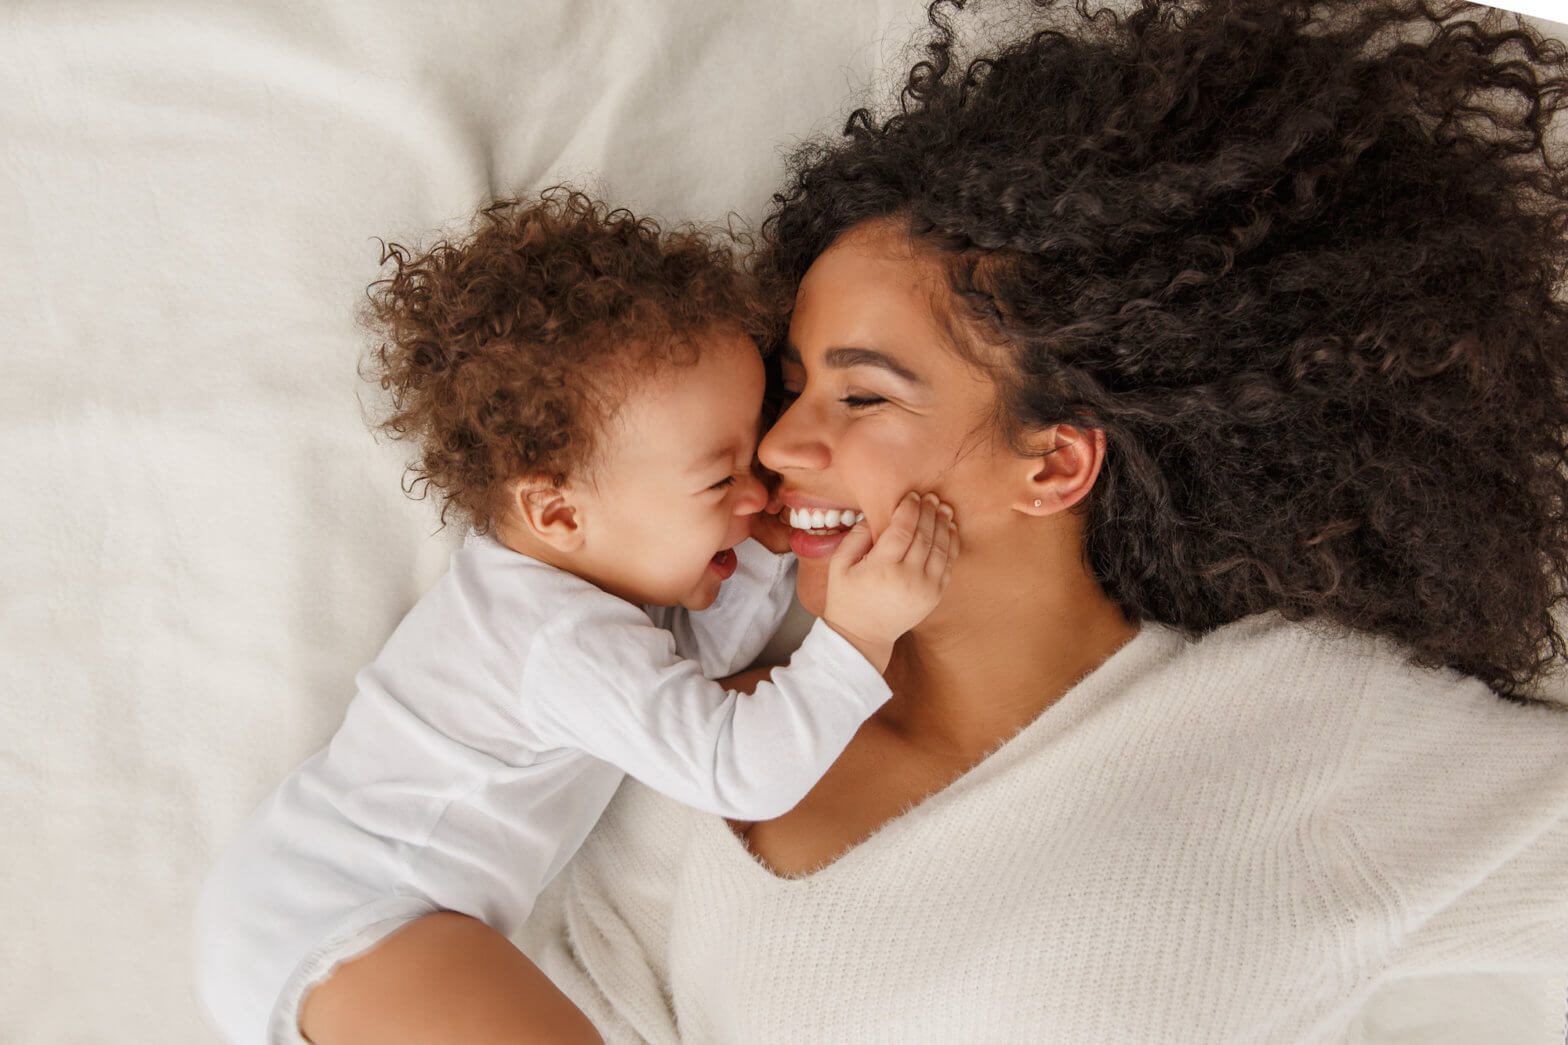 A woman with dark curly hair lays in bed with her baby smiling as the baby has a hand on her cheek.